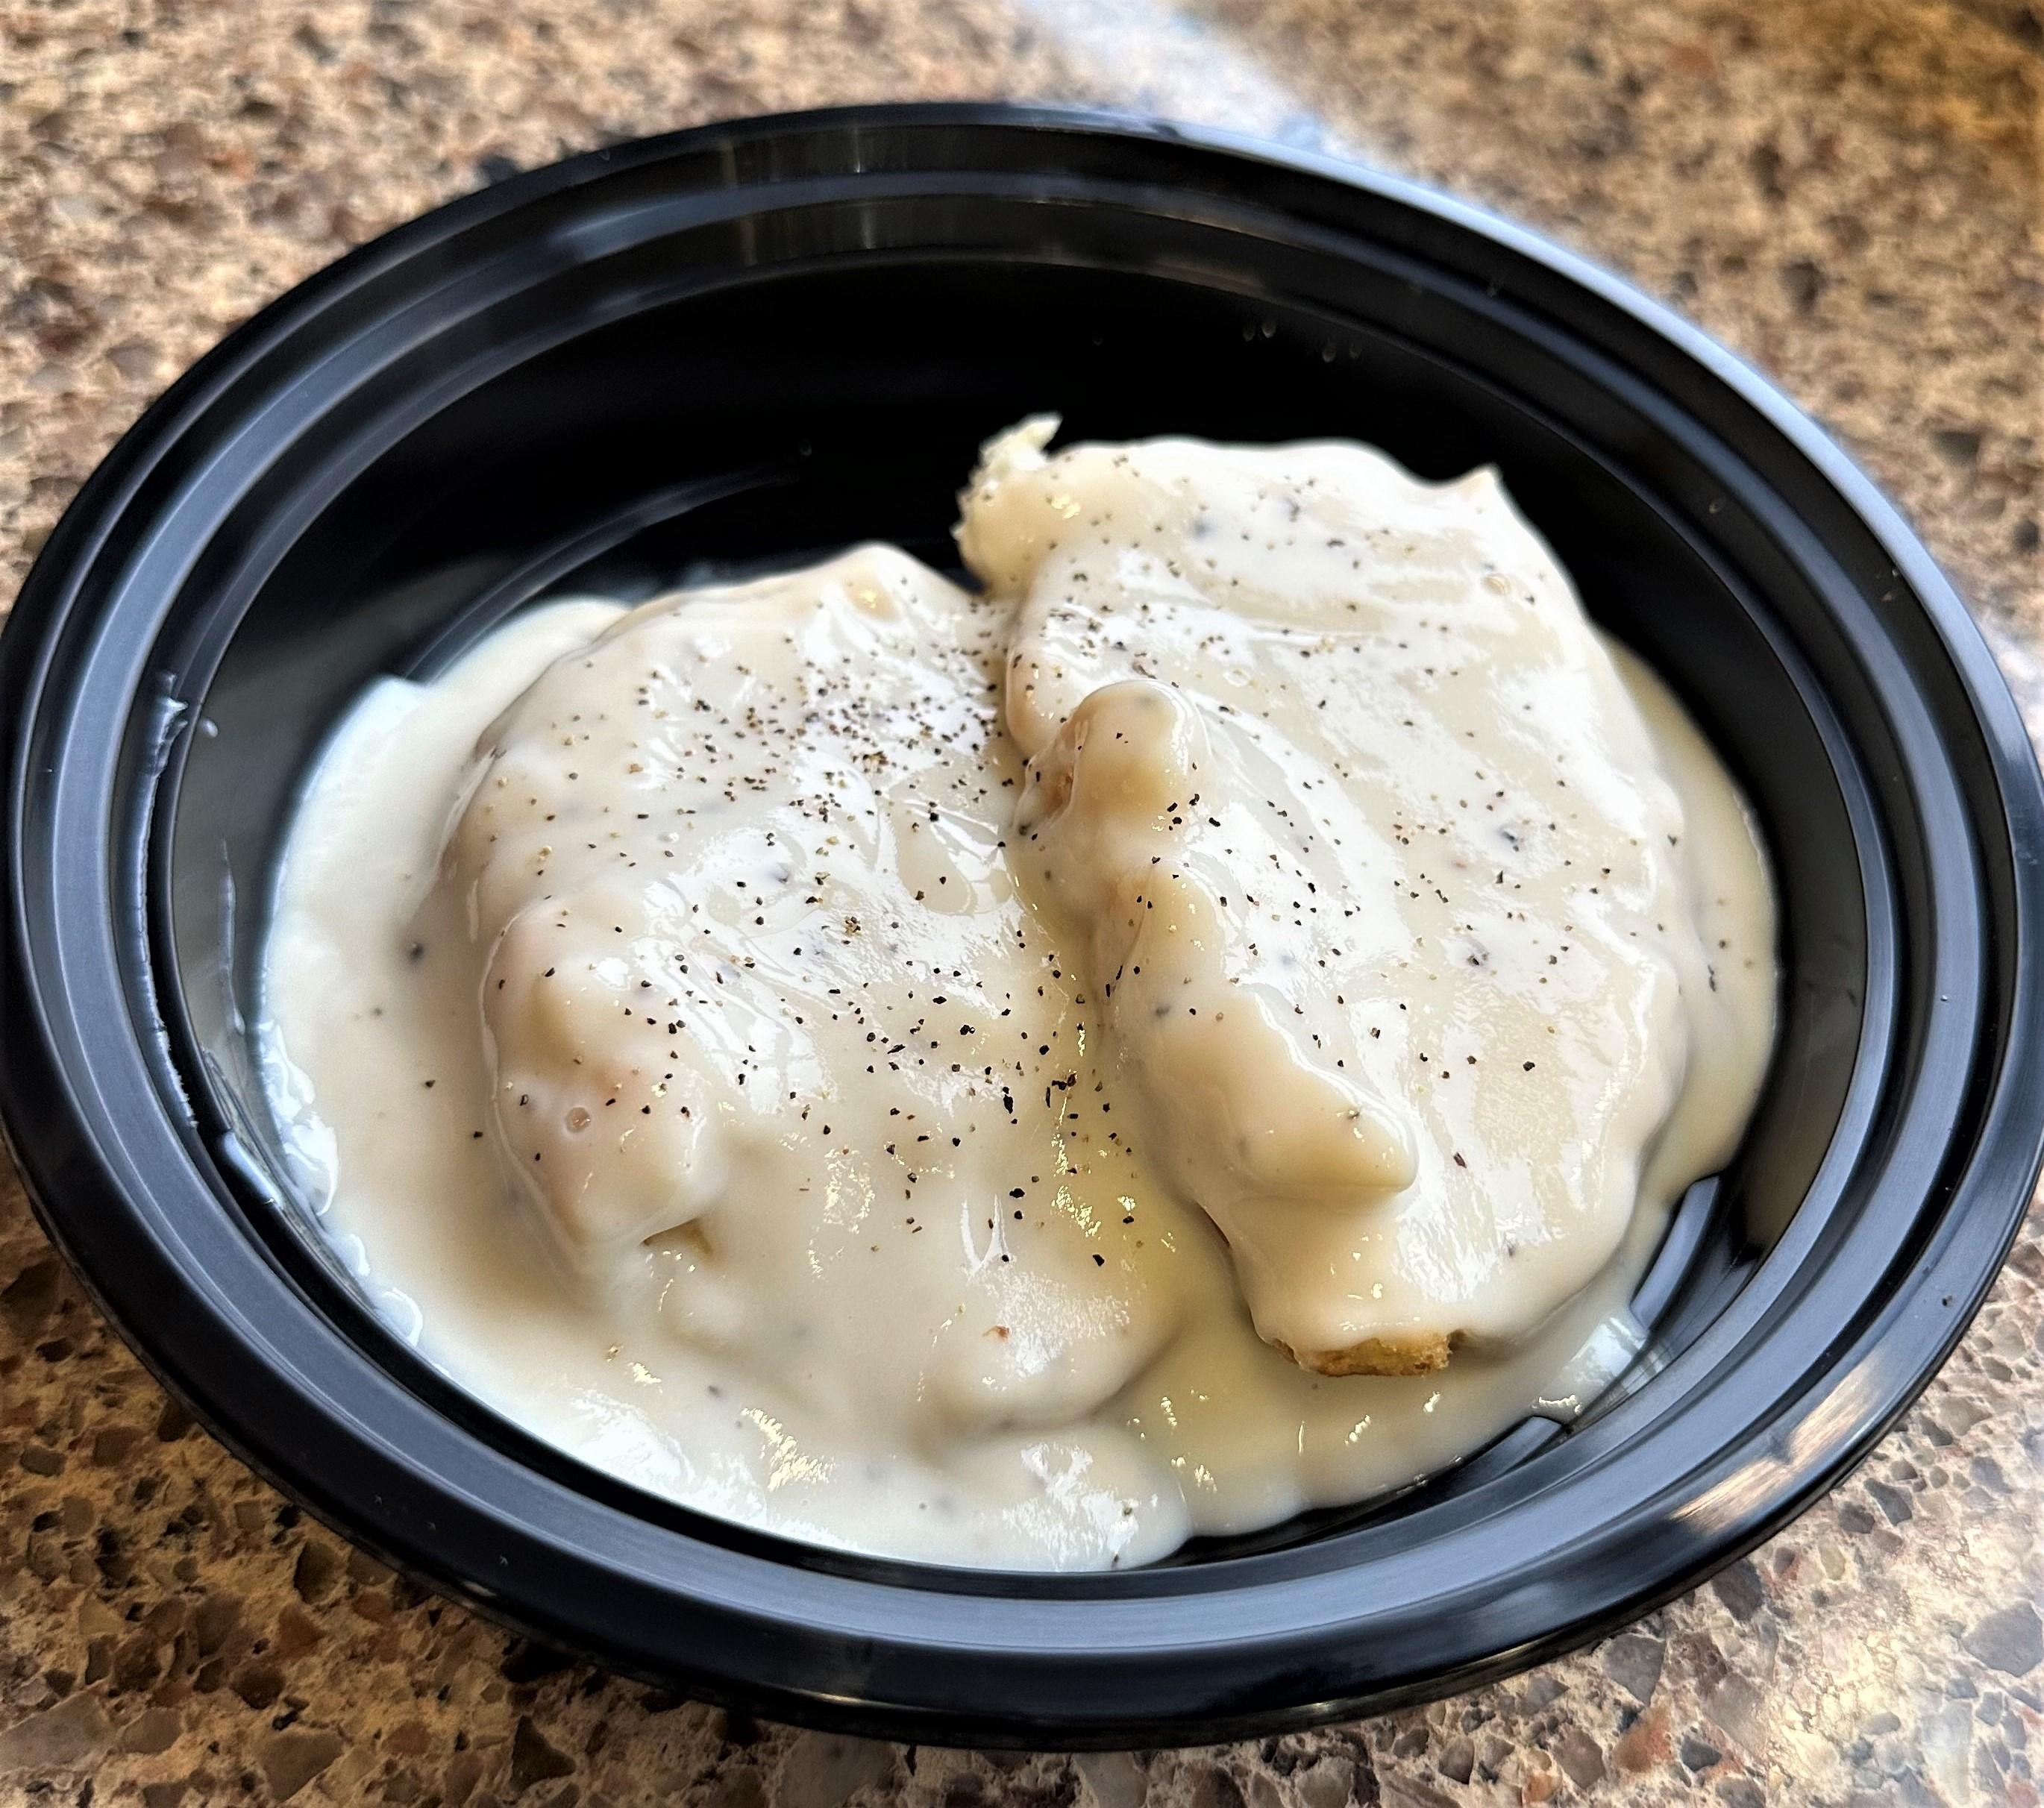 LG Biscuits and Gravy